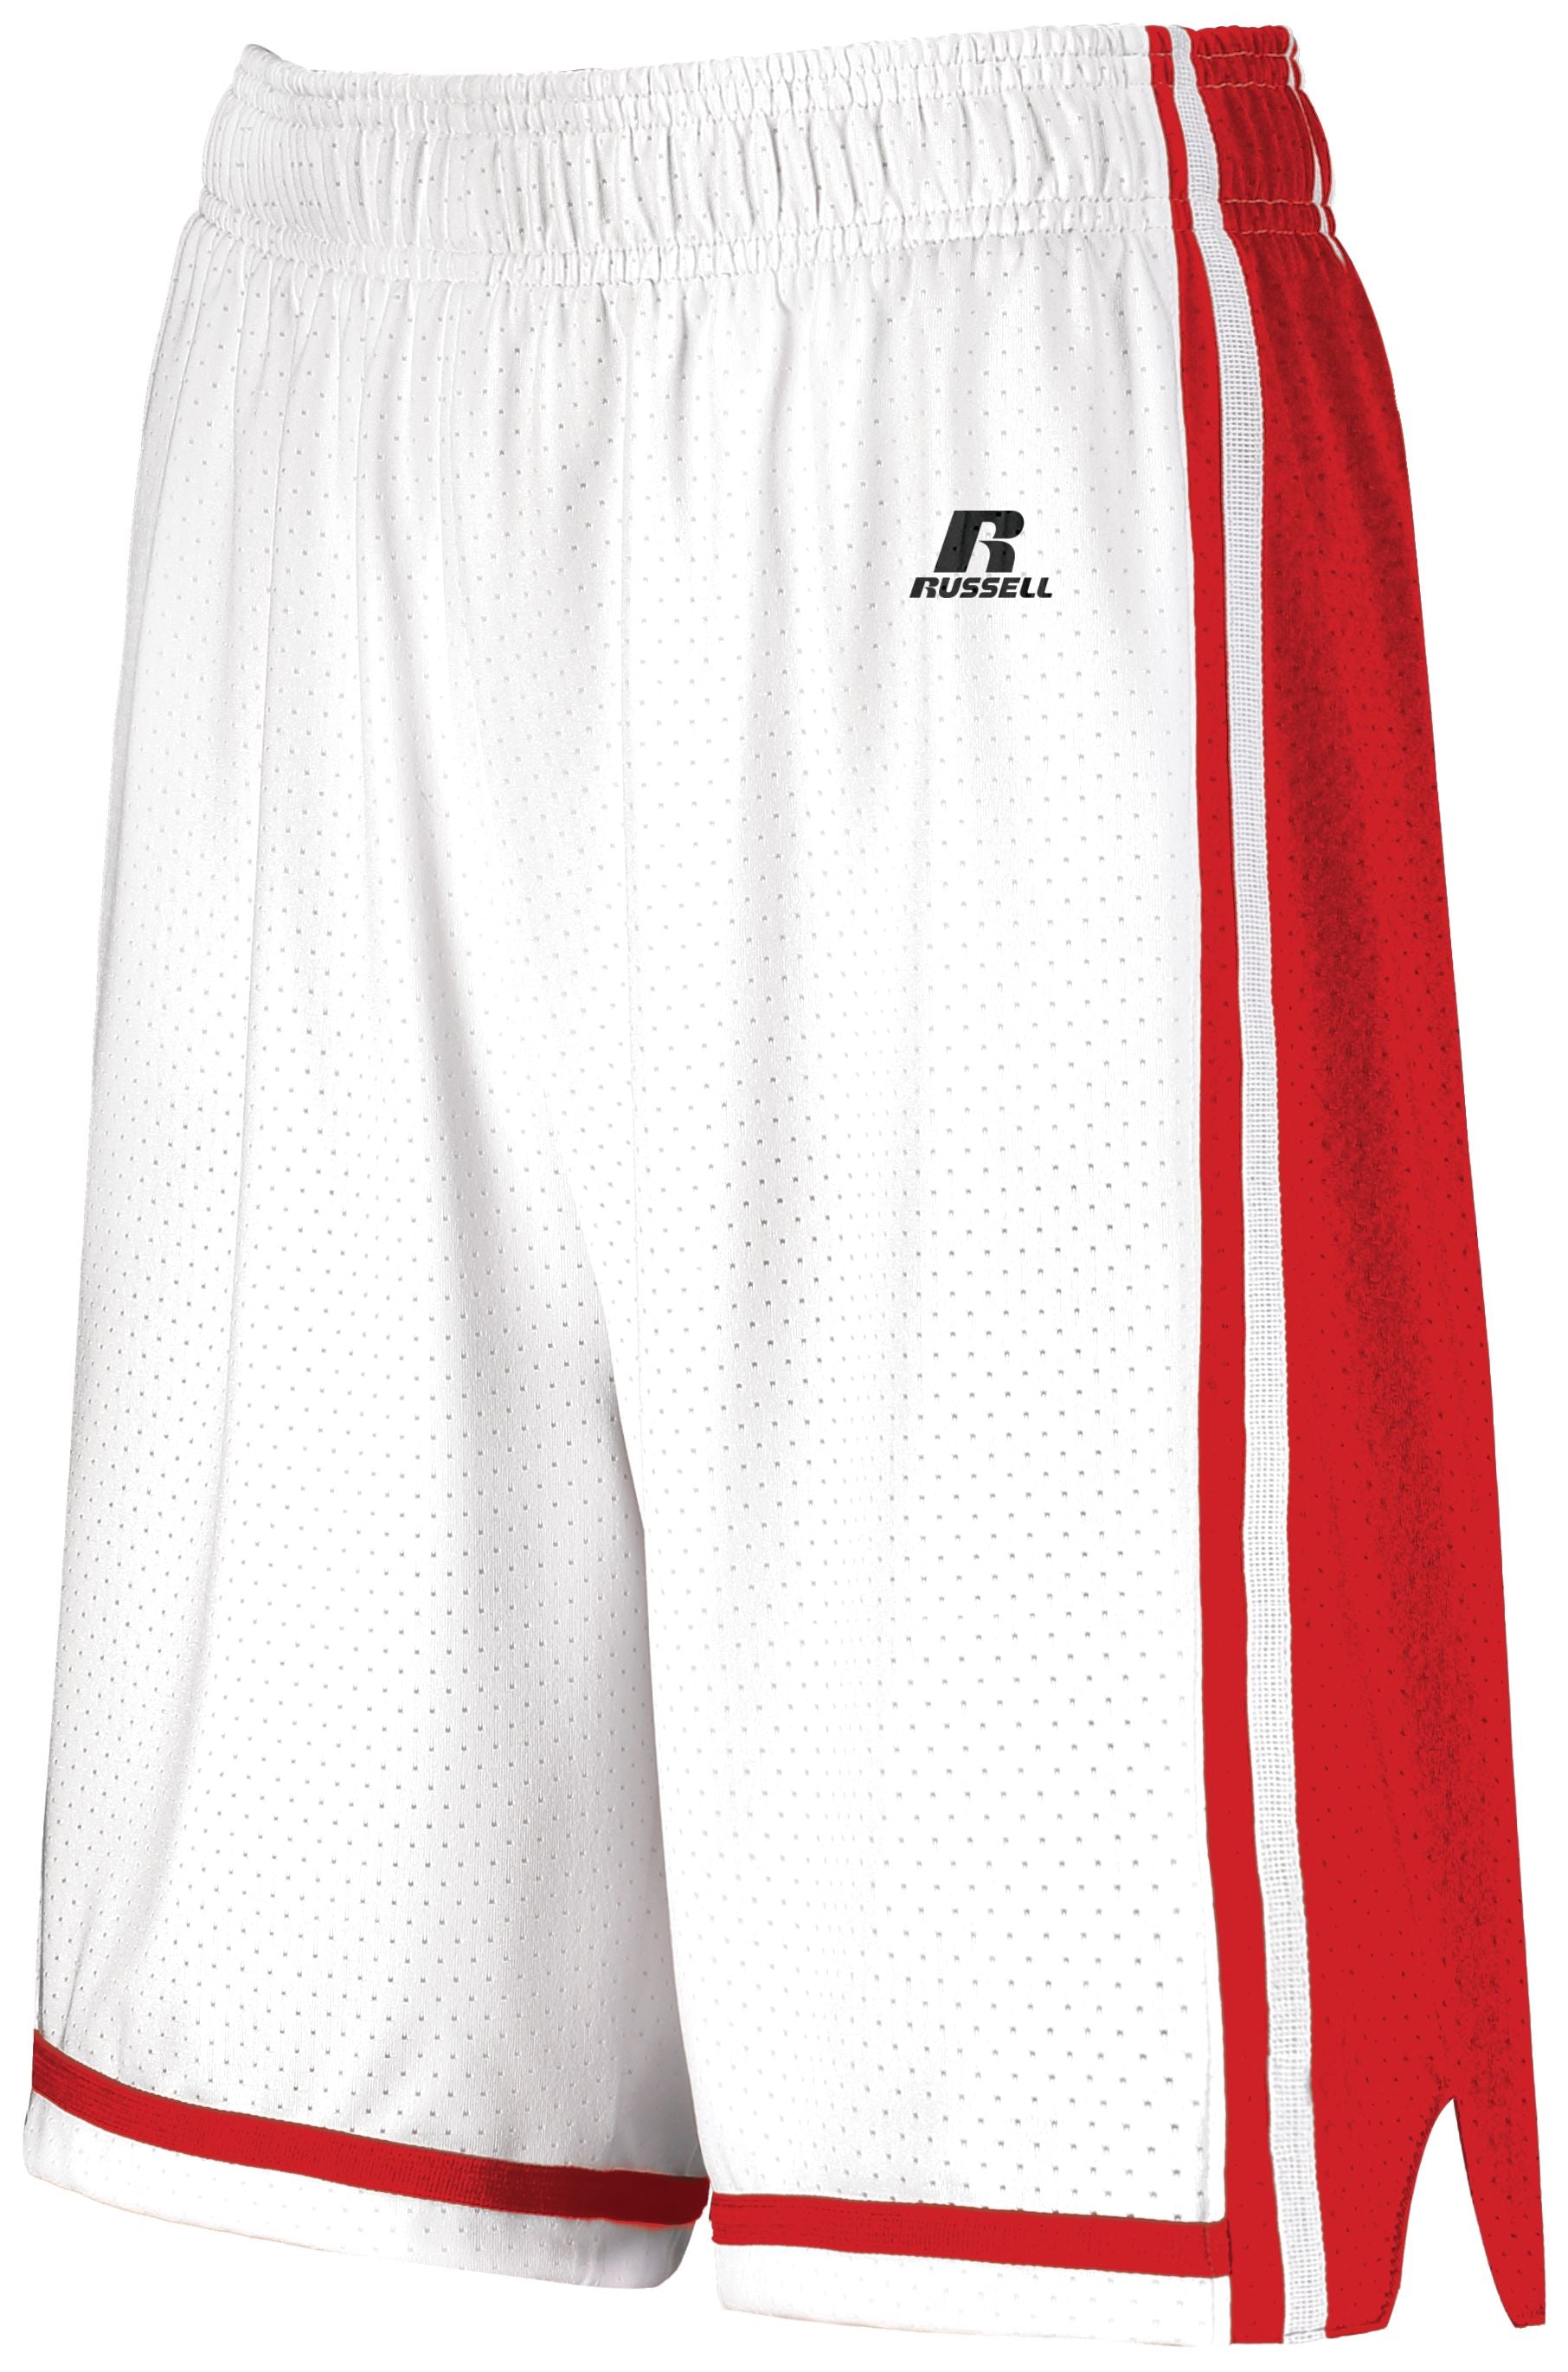 Russell Athletic Ladies Legacy Basketball Shorts in White/True Red  -Part of the Ladies, Ladies-Shorts, Basketball, Russell-Athletic-Products, All-Sports, All-Sports-1 product lines at KanaleyCreations.com